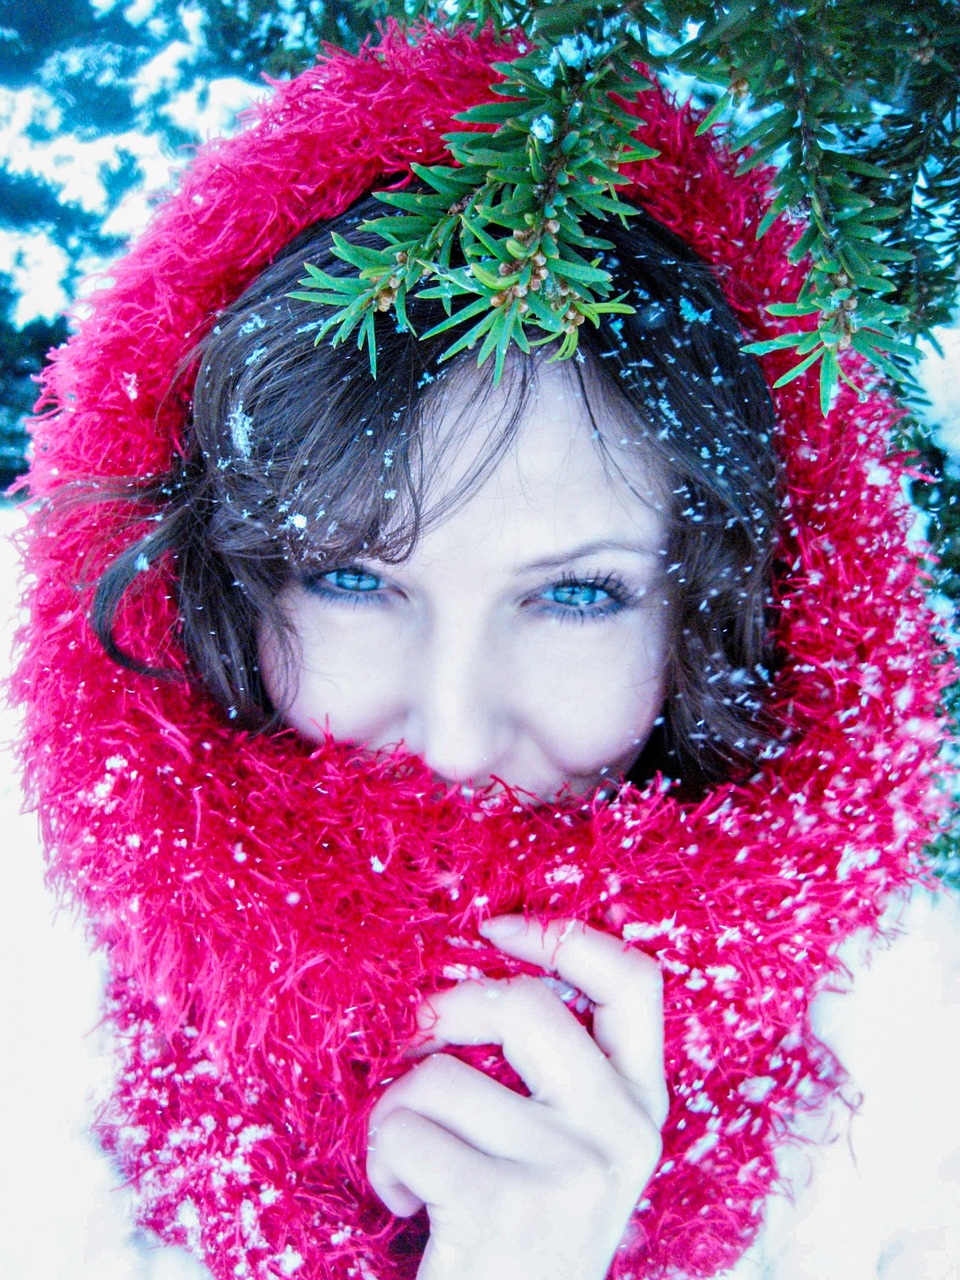 lady in red in the snow snowfall free photo